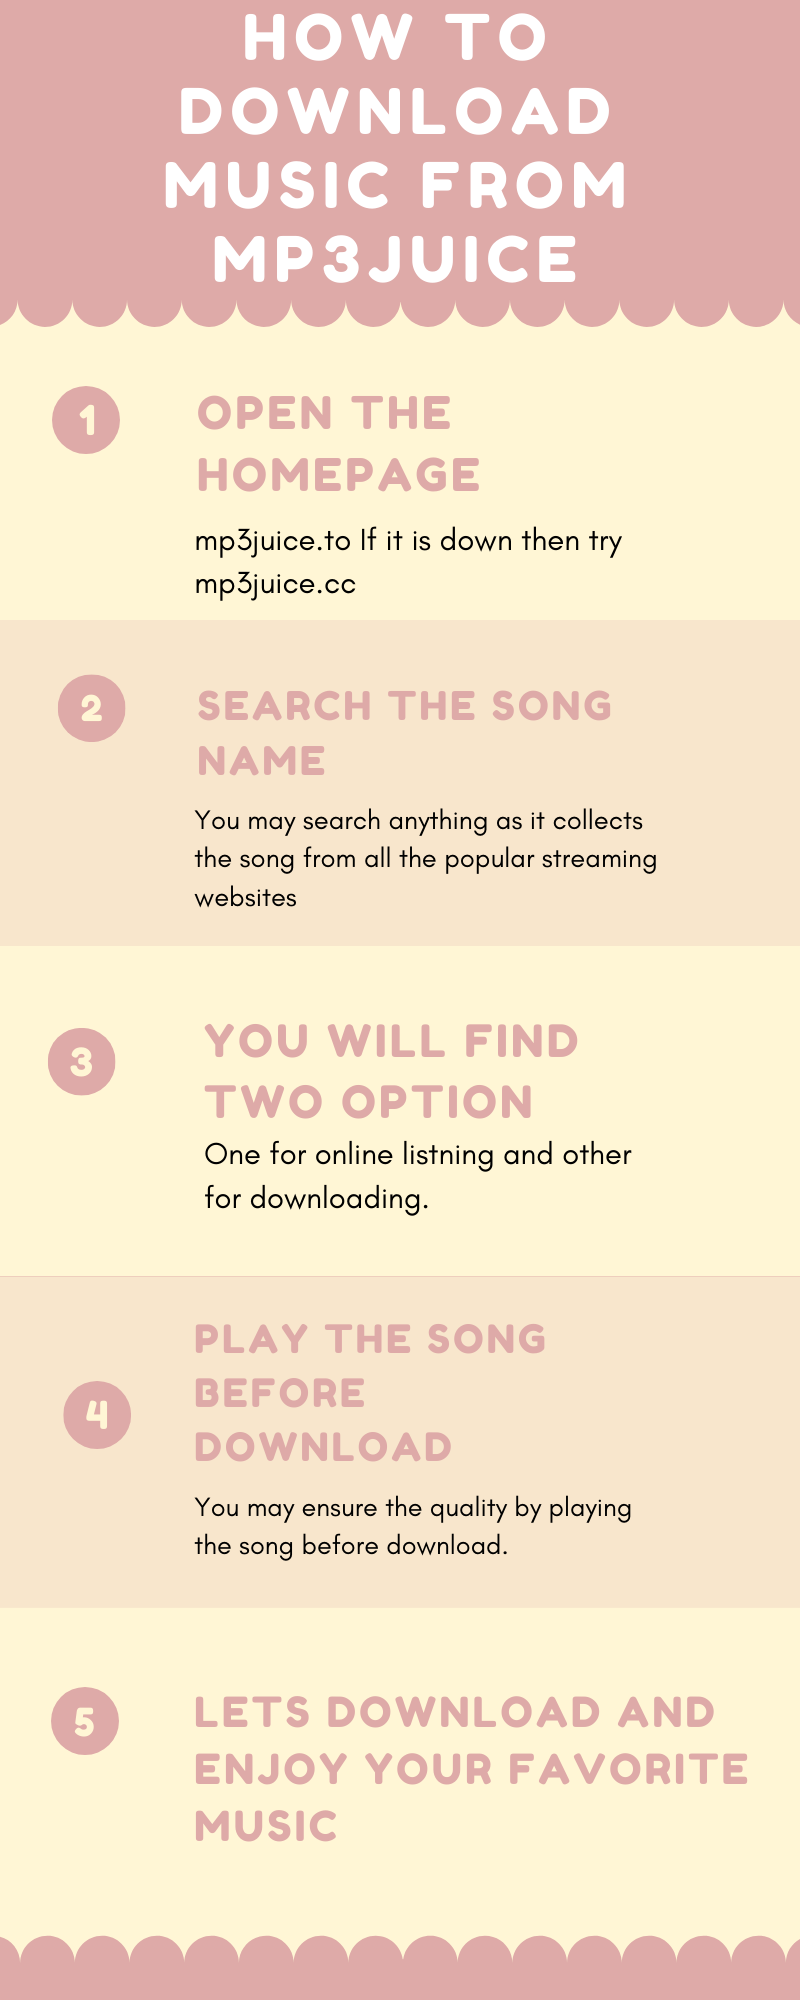 Music Download procedure from mp3juice infographic